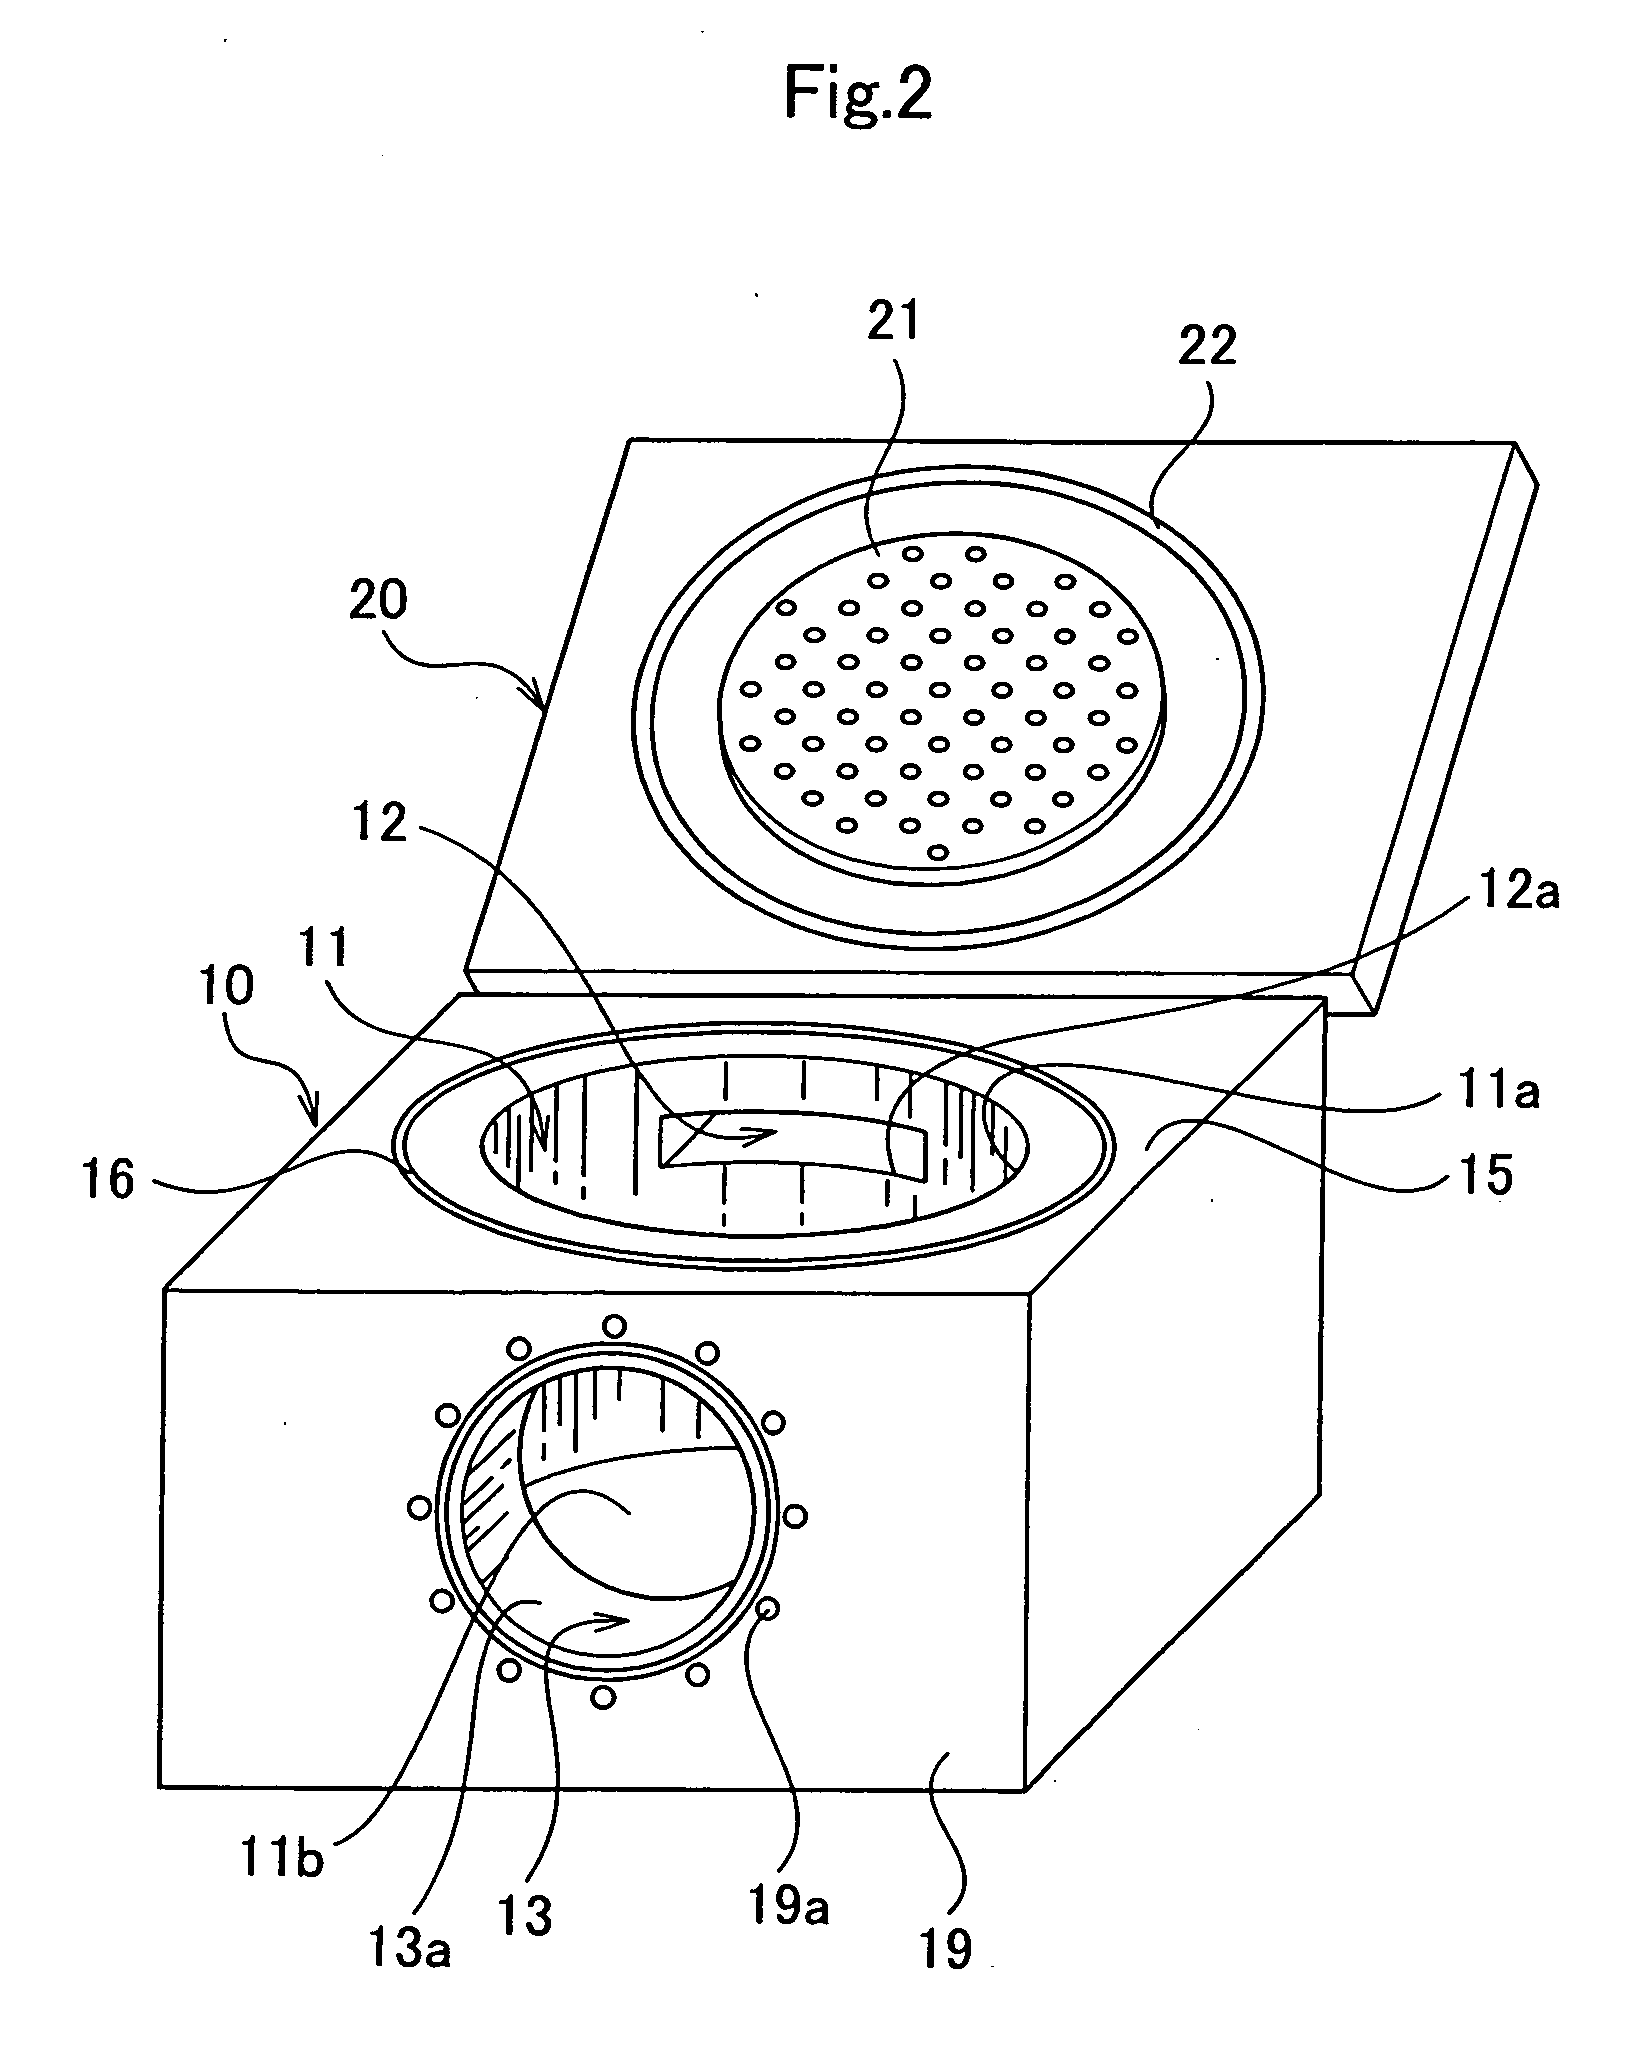 Semiconductor manufacturing device and its heating unit